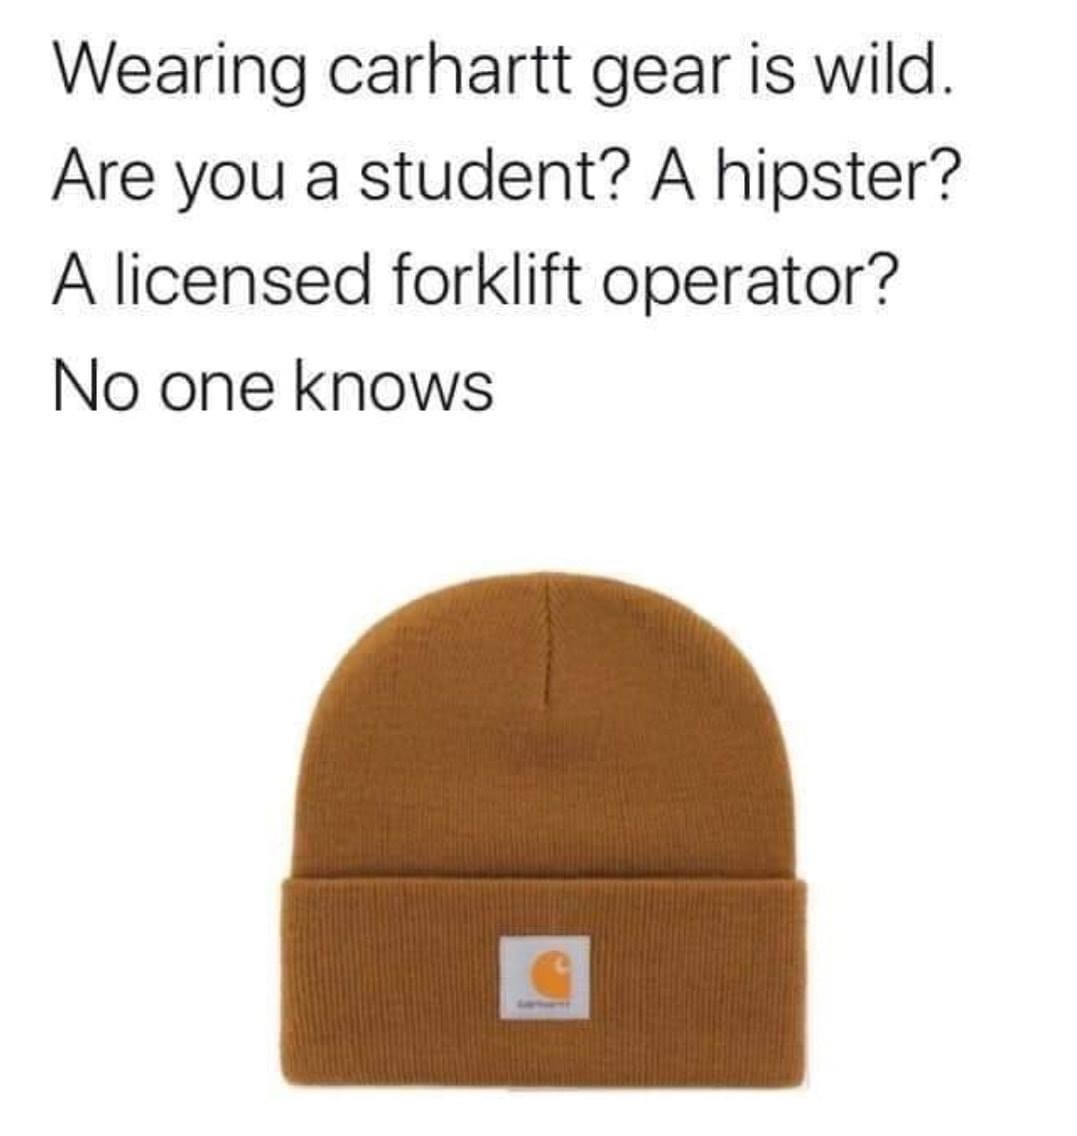 funny memes - Wearing carhartt gear is wild. Are you a student? A hipster? A licensed forklift operator? No one knows